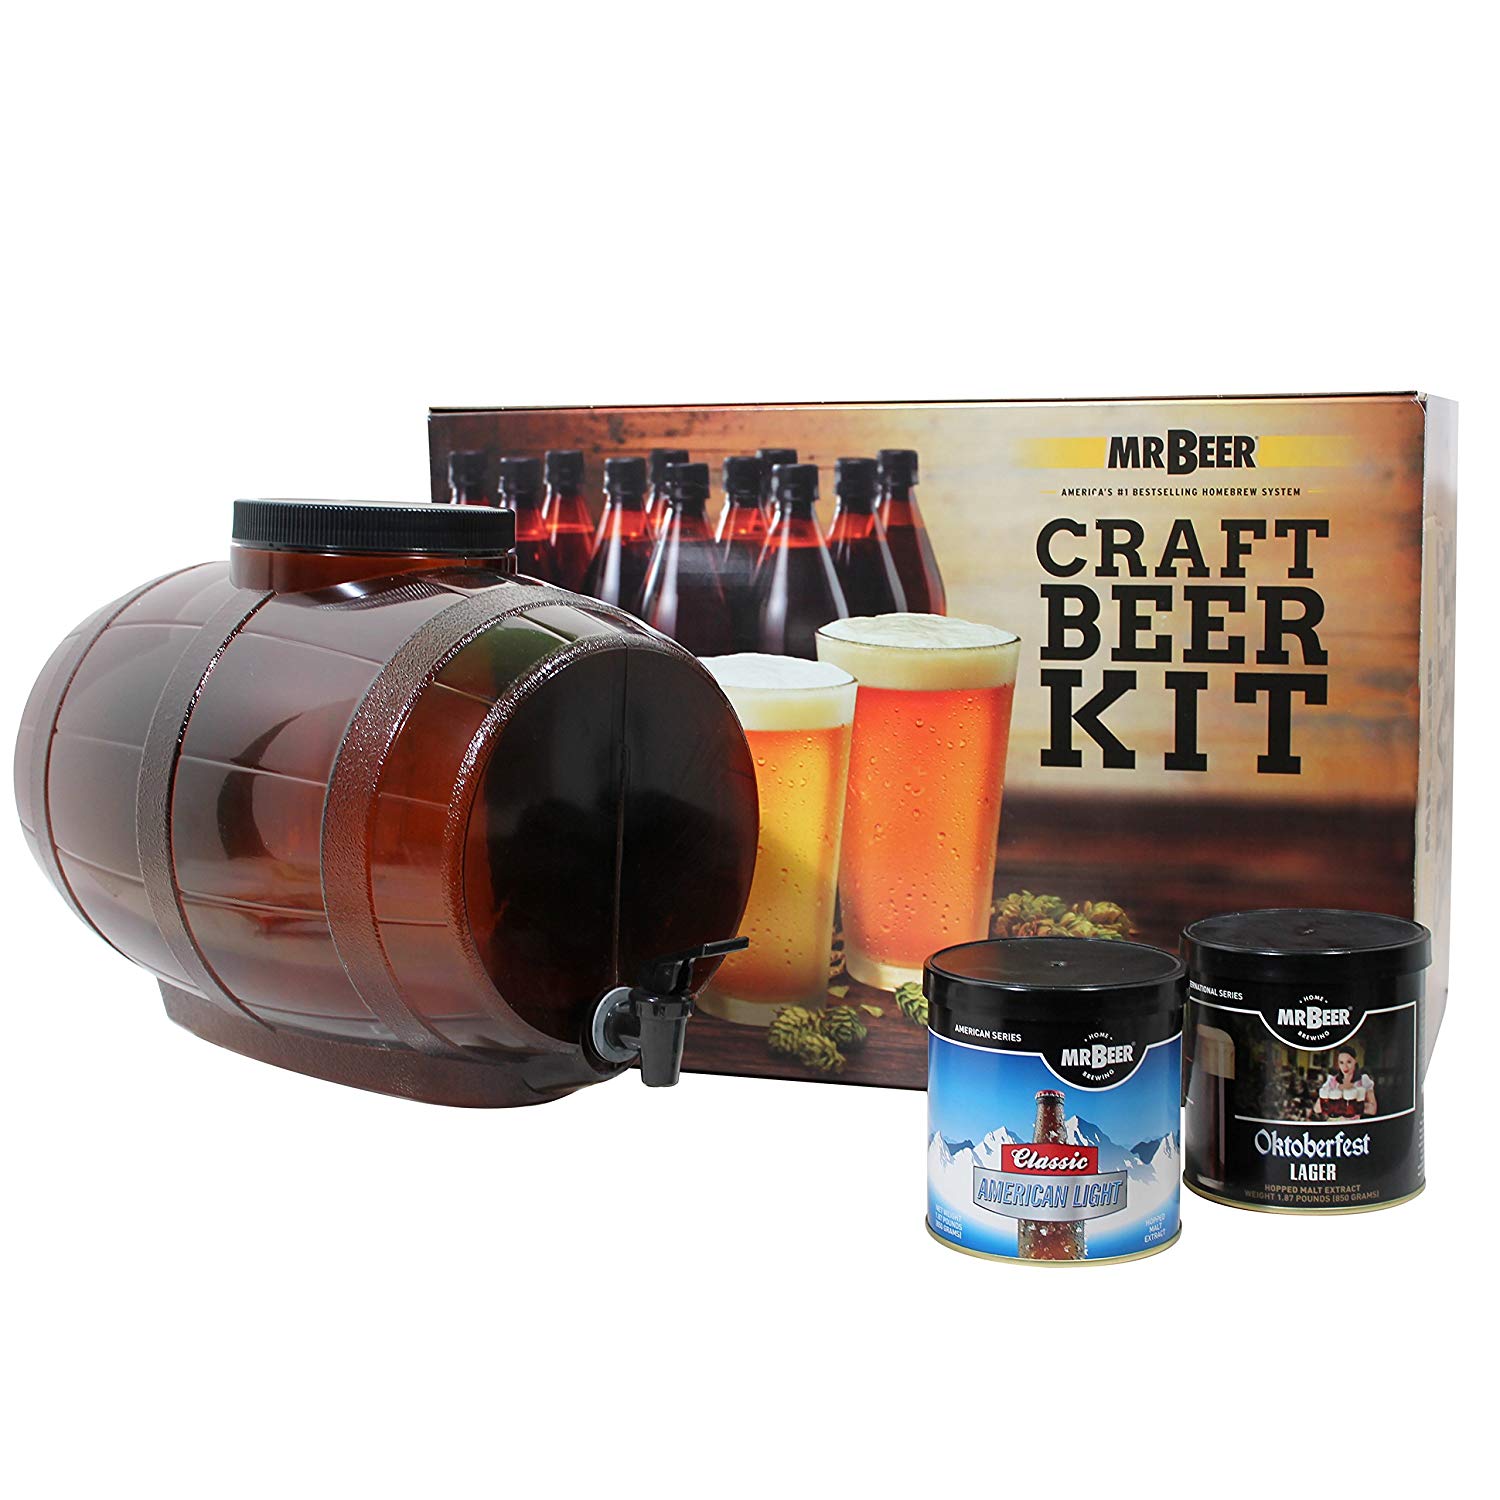 A man who drinks beer should also be a man who makes his own beer. With this <a href="https://amzn.to/2BOOsMj" target="_blank">Home Brew Kit</a> your average man can become more than his neighbor and drunker than the gods themselves. 